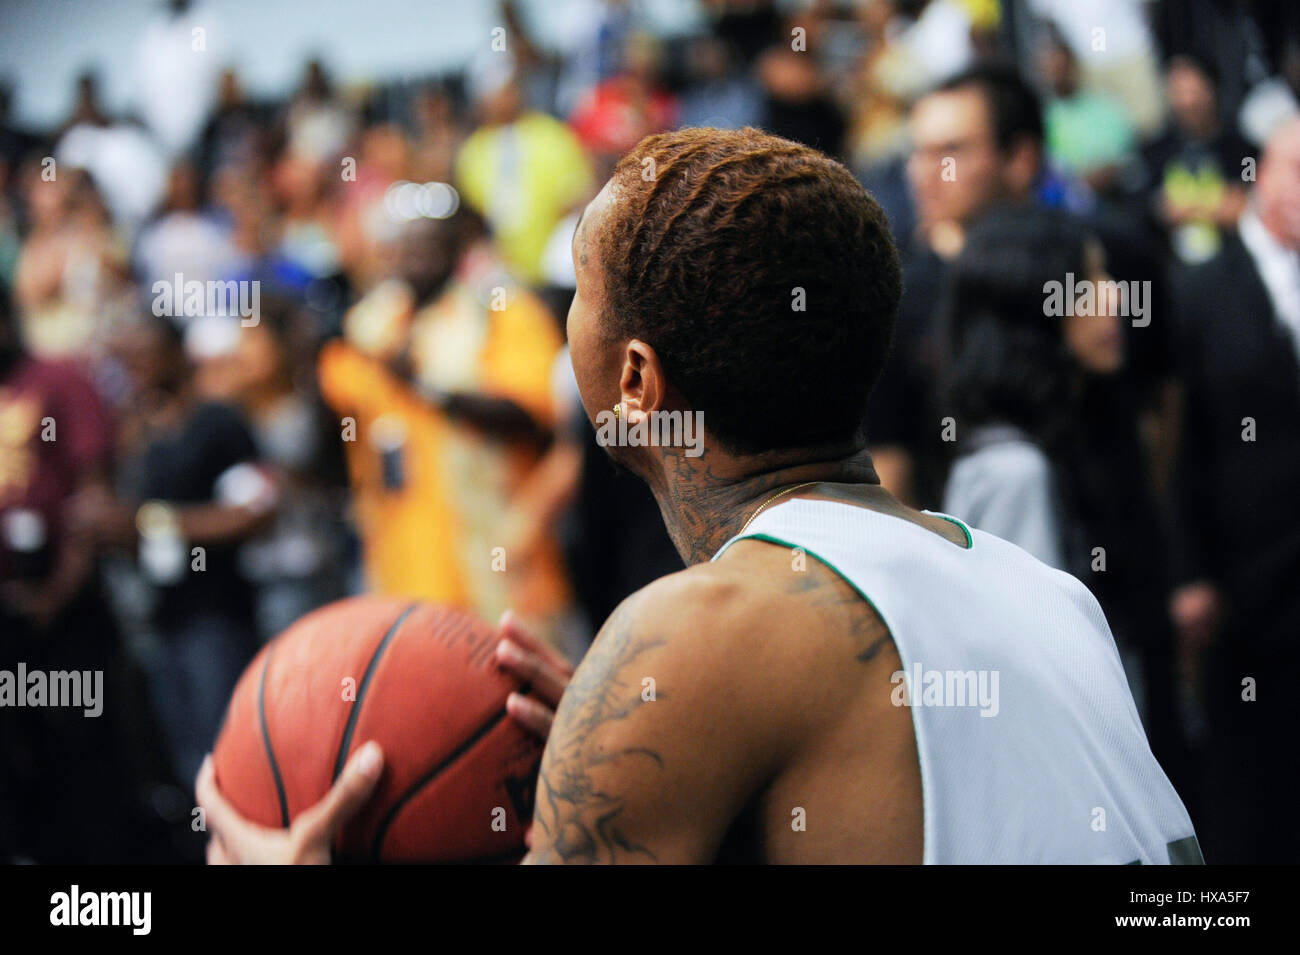 Tyga attends the Sprite Celebrity Basketball Game during the 2014 BET Experience At L.A. LIVE on June 28, 2014 in Los Angeles, California. Stock Photo